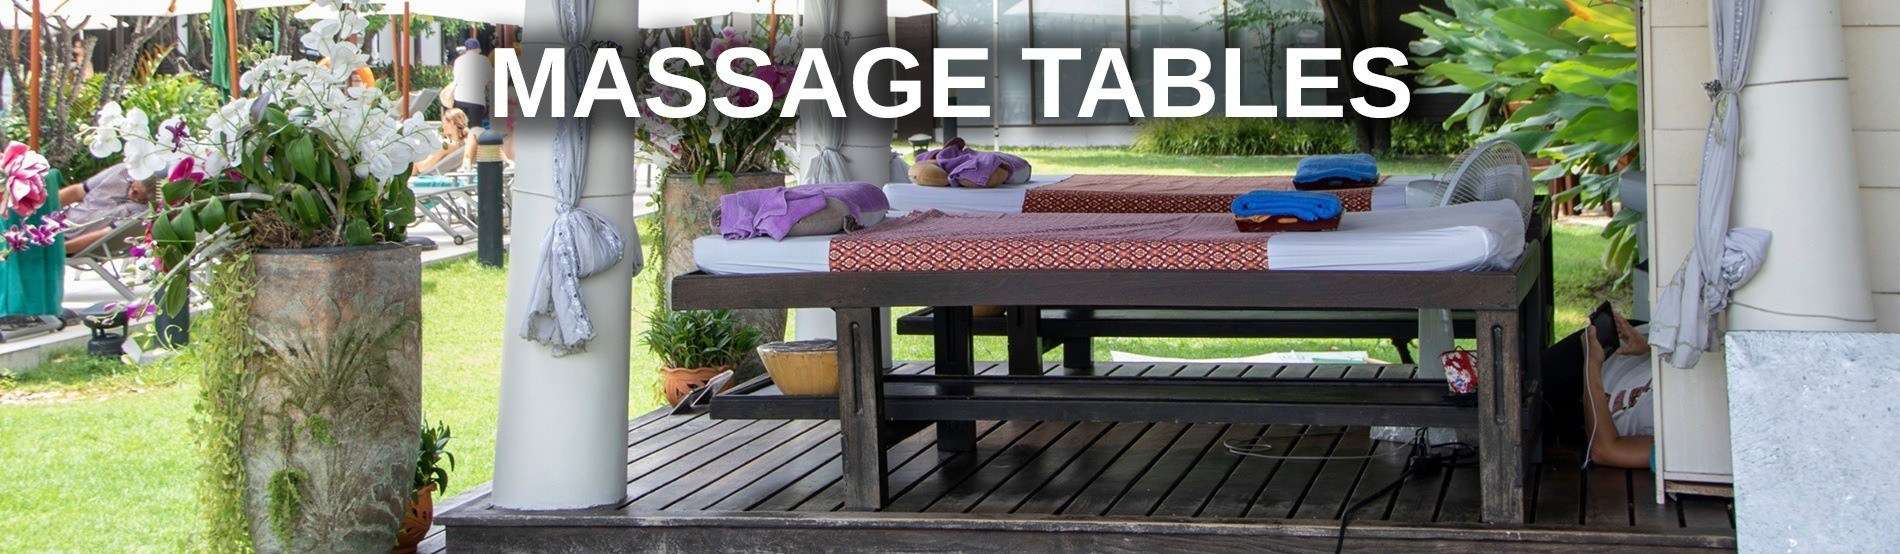 Massage Table Bench Bed for Massage Thai